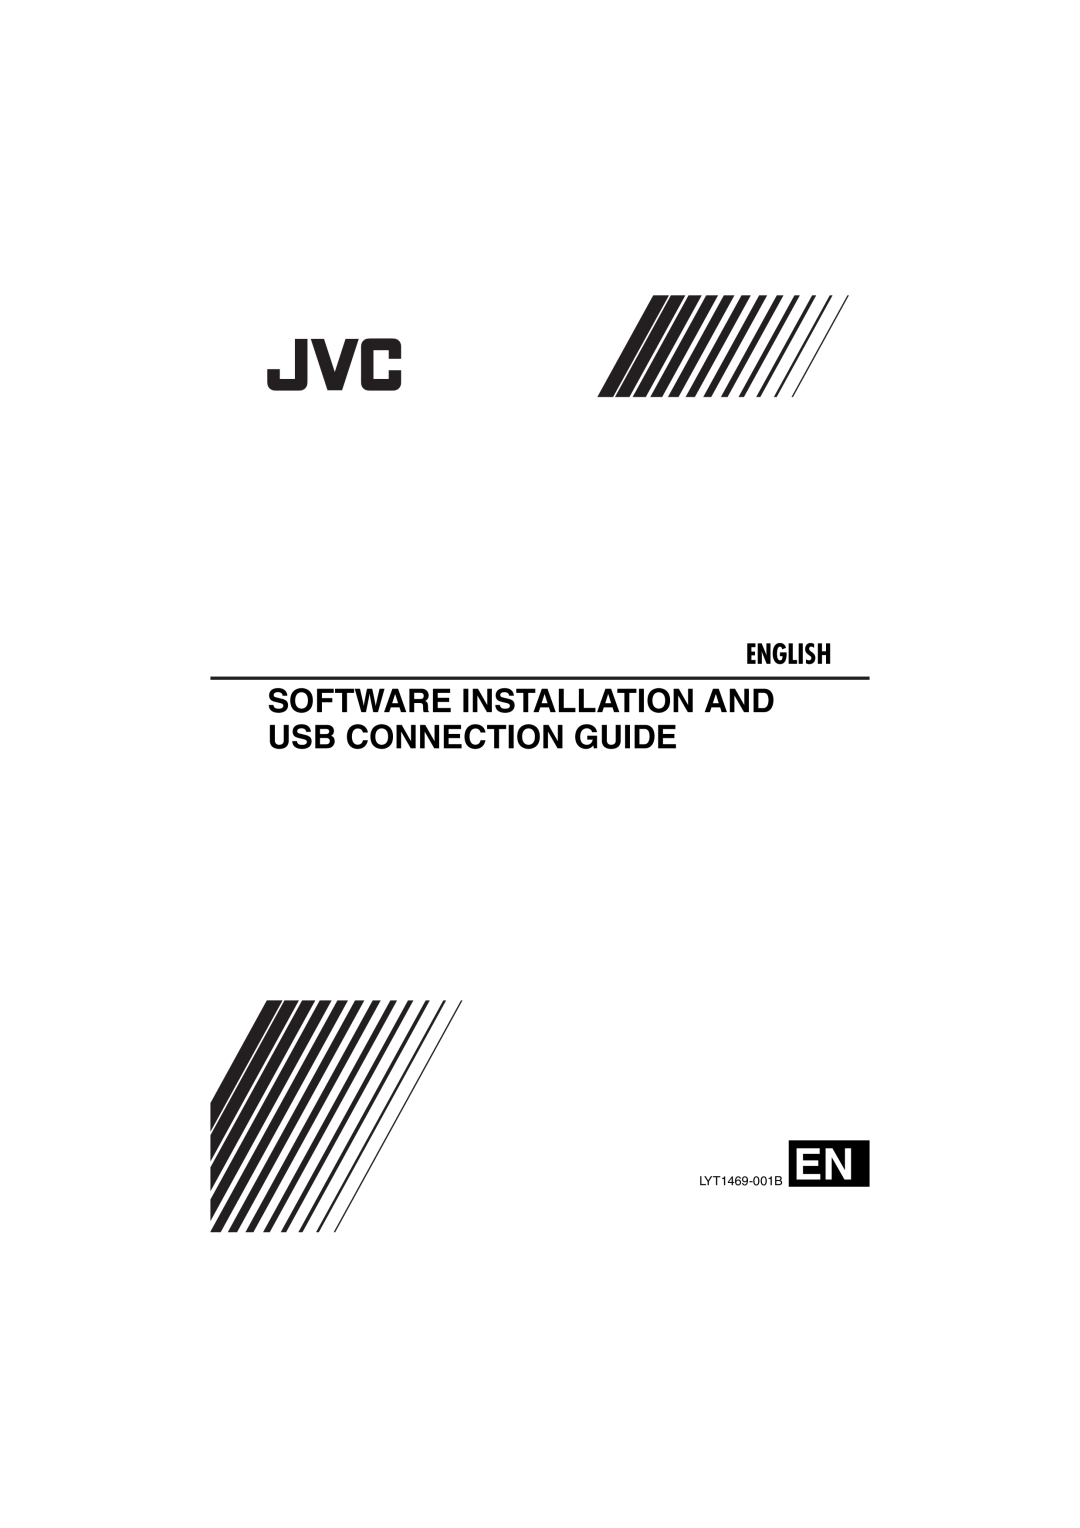 JVC GZ-MG70AS, GZ-MG70AA, GZ-MG70AH, GZ-MG70AG, LYT1496-001A manual Software Installation And Usb Connection Guide, English 